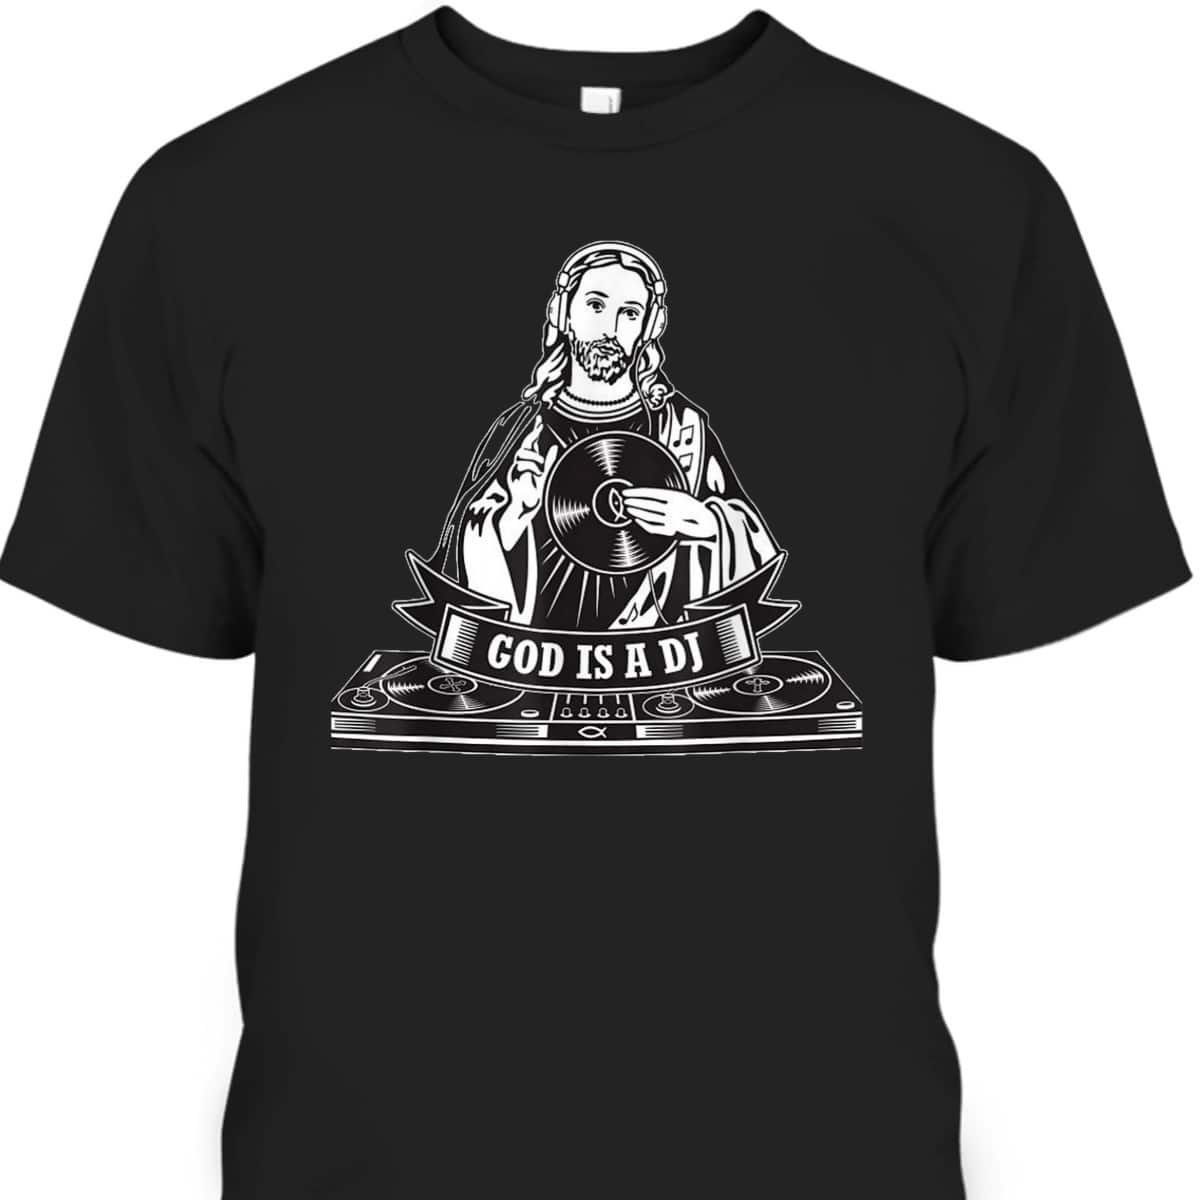 God Is A DJ Funny Christian Religious T-Shirt For Friend